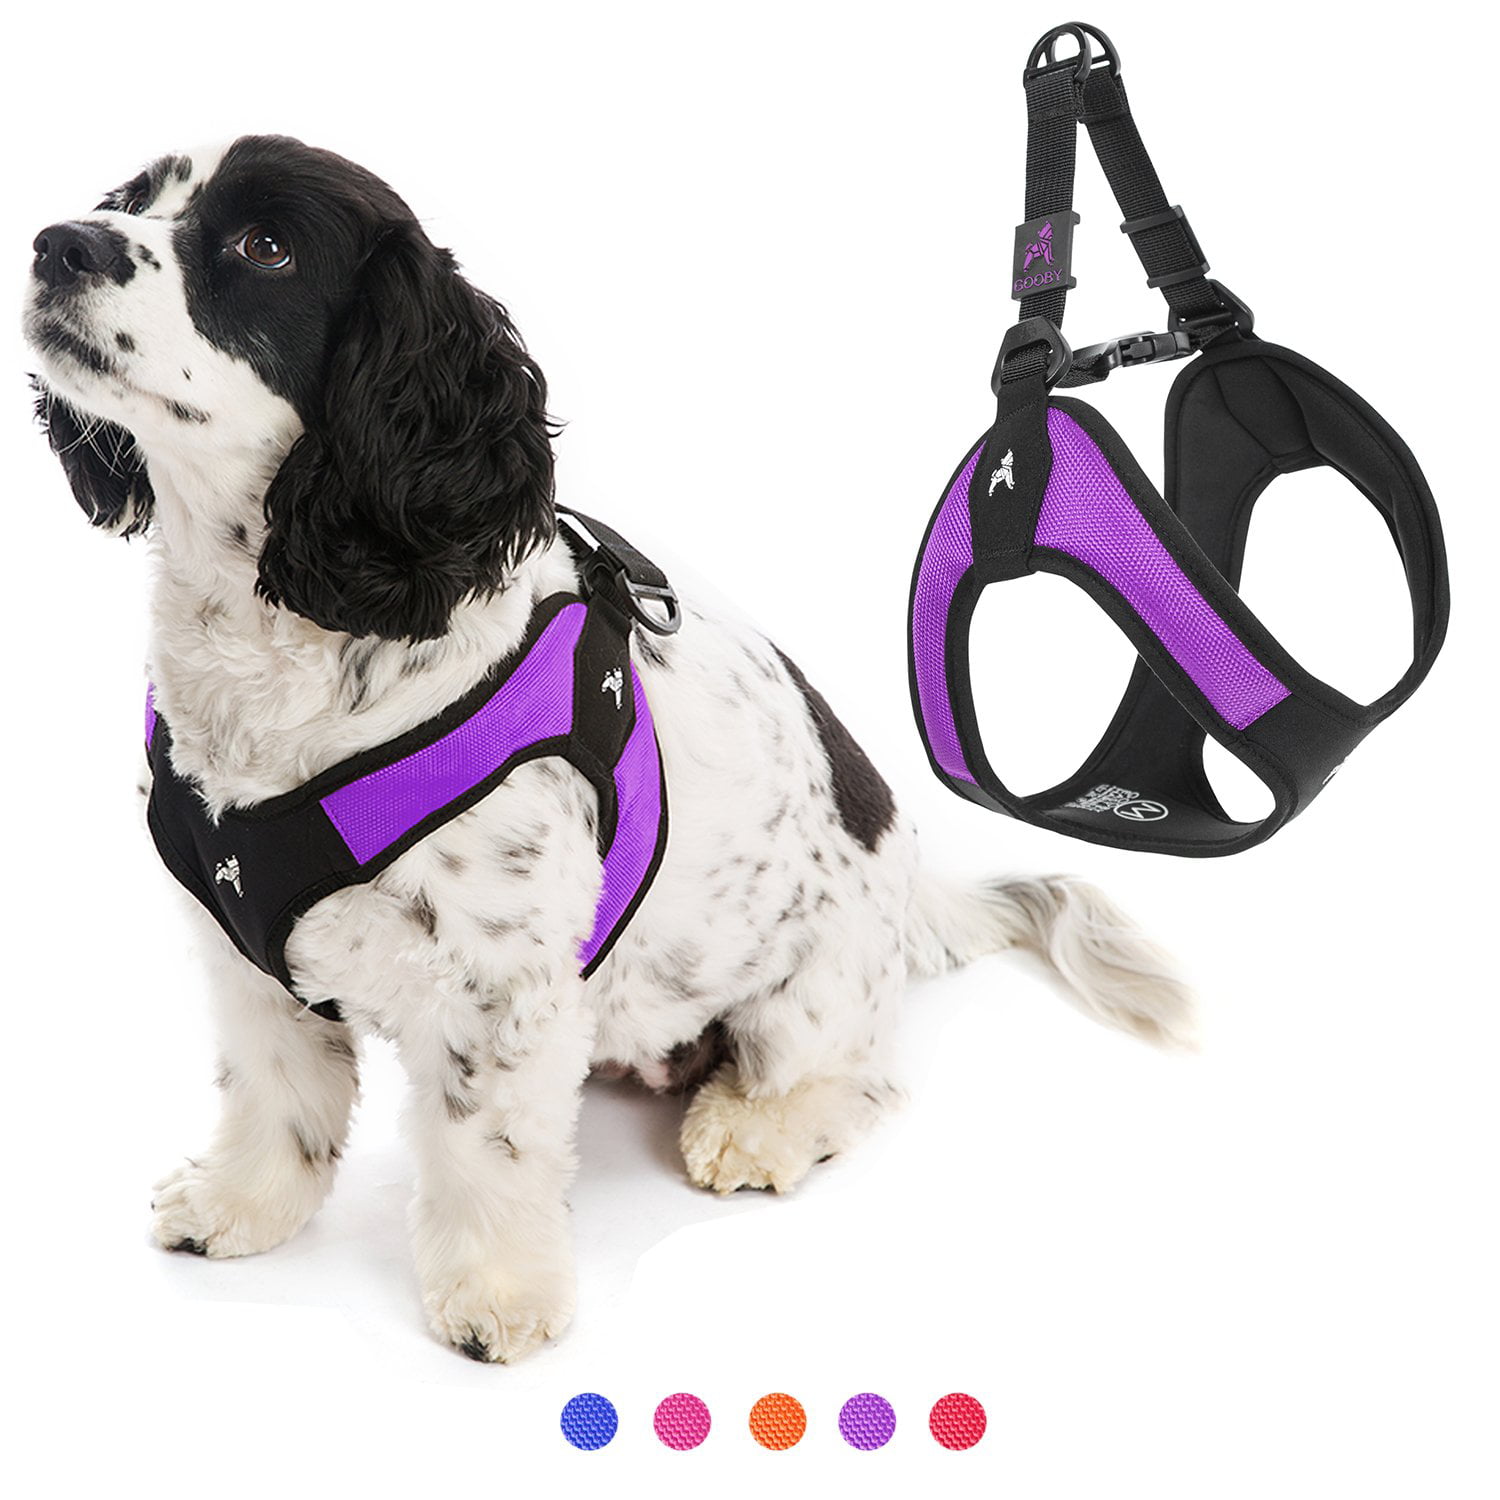 Adjustable Harness Colorful Paws Bones Step-In Dog Harness Large Dog Harness Teacup Puppy Small Dog Harness Cat Harness